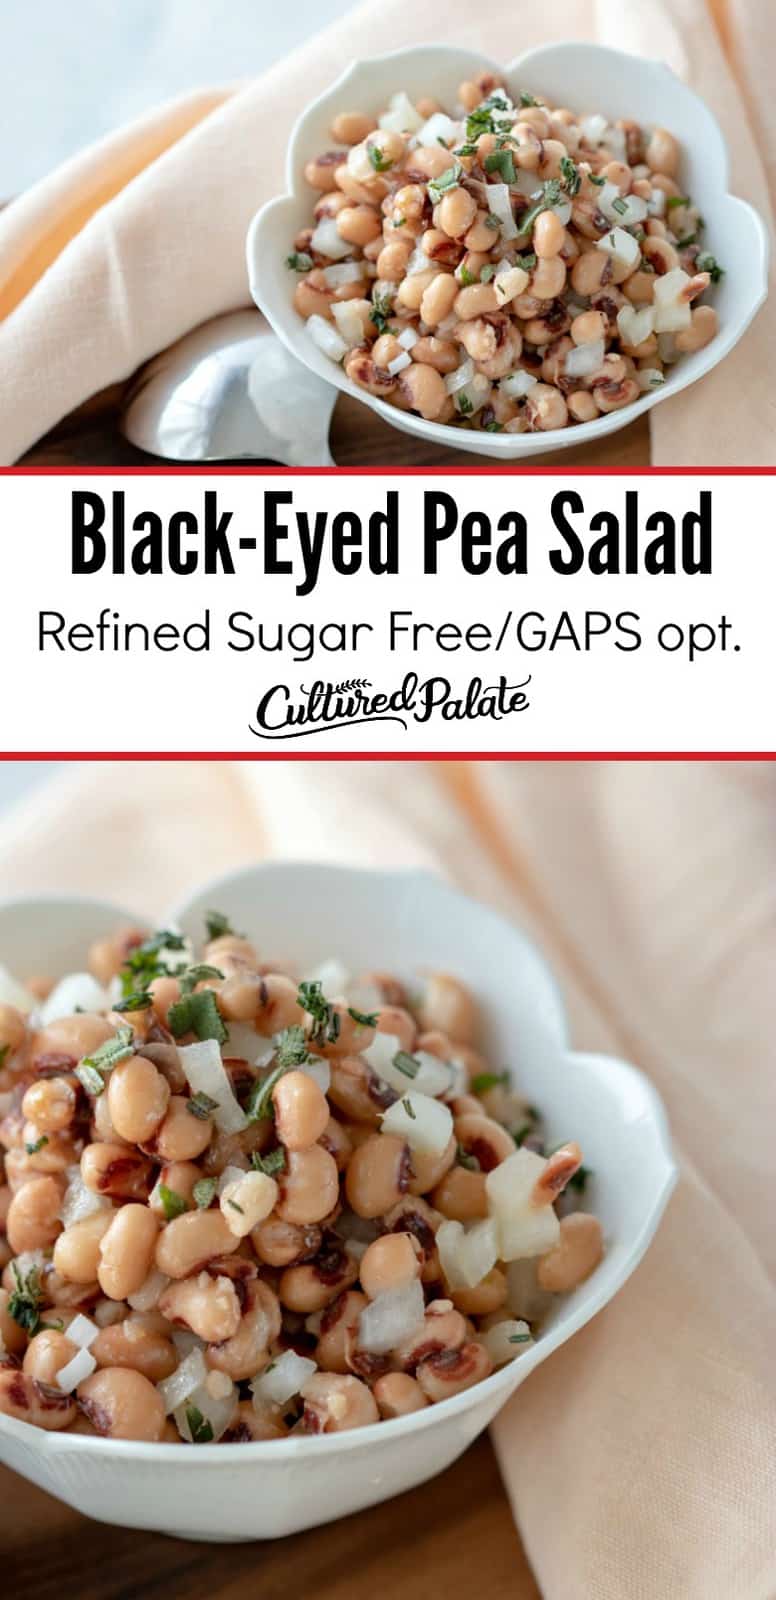 Black-Eyed Pea Salad shown with two images both in white bowl with spoon on wooden board with text overlay.